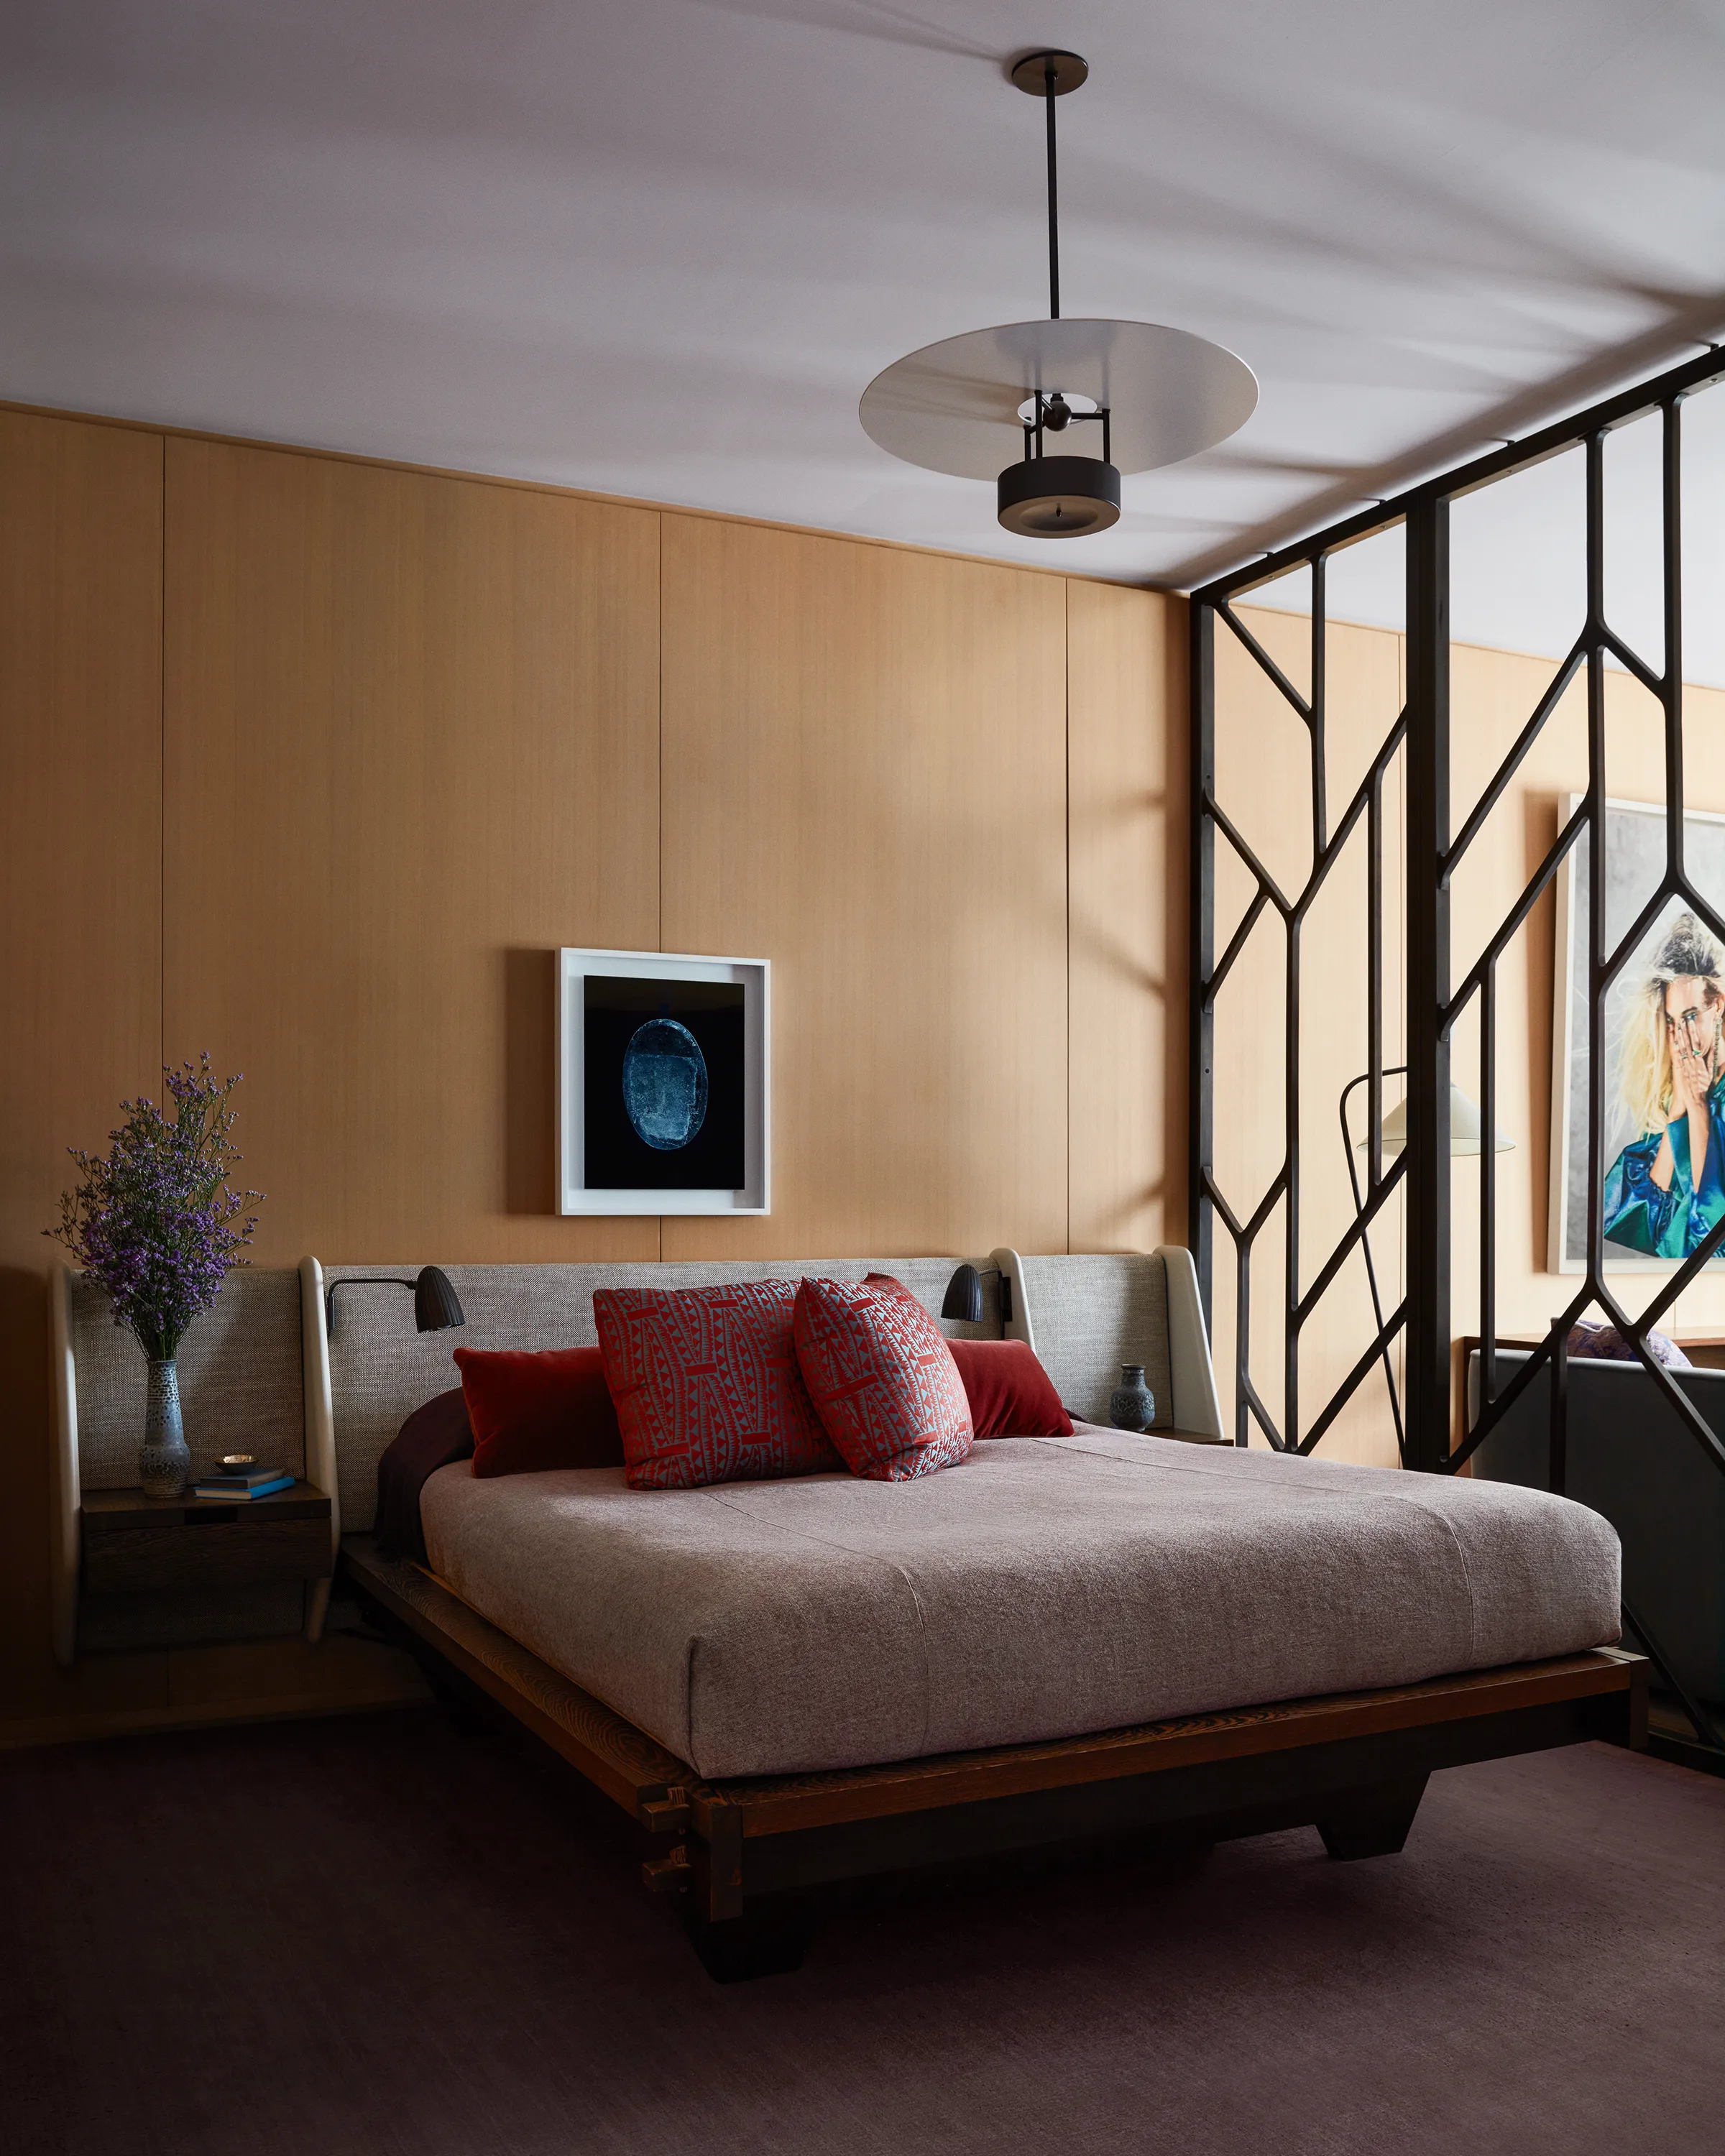 A wenge wood bed frame and custom Chroma headboard in Claremont linen with built-in vintage Böhlmarks sconces, c. 1940s, reposes below a vintage Arne Jacobsen pendant light and a unique ilfochrome by Richard Learoyd.